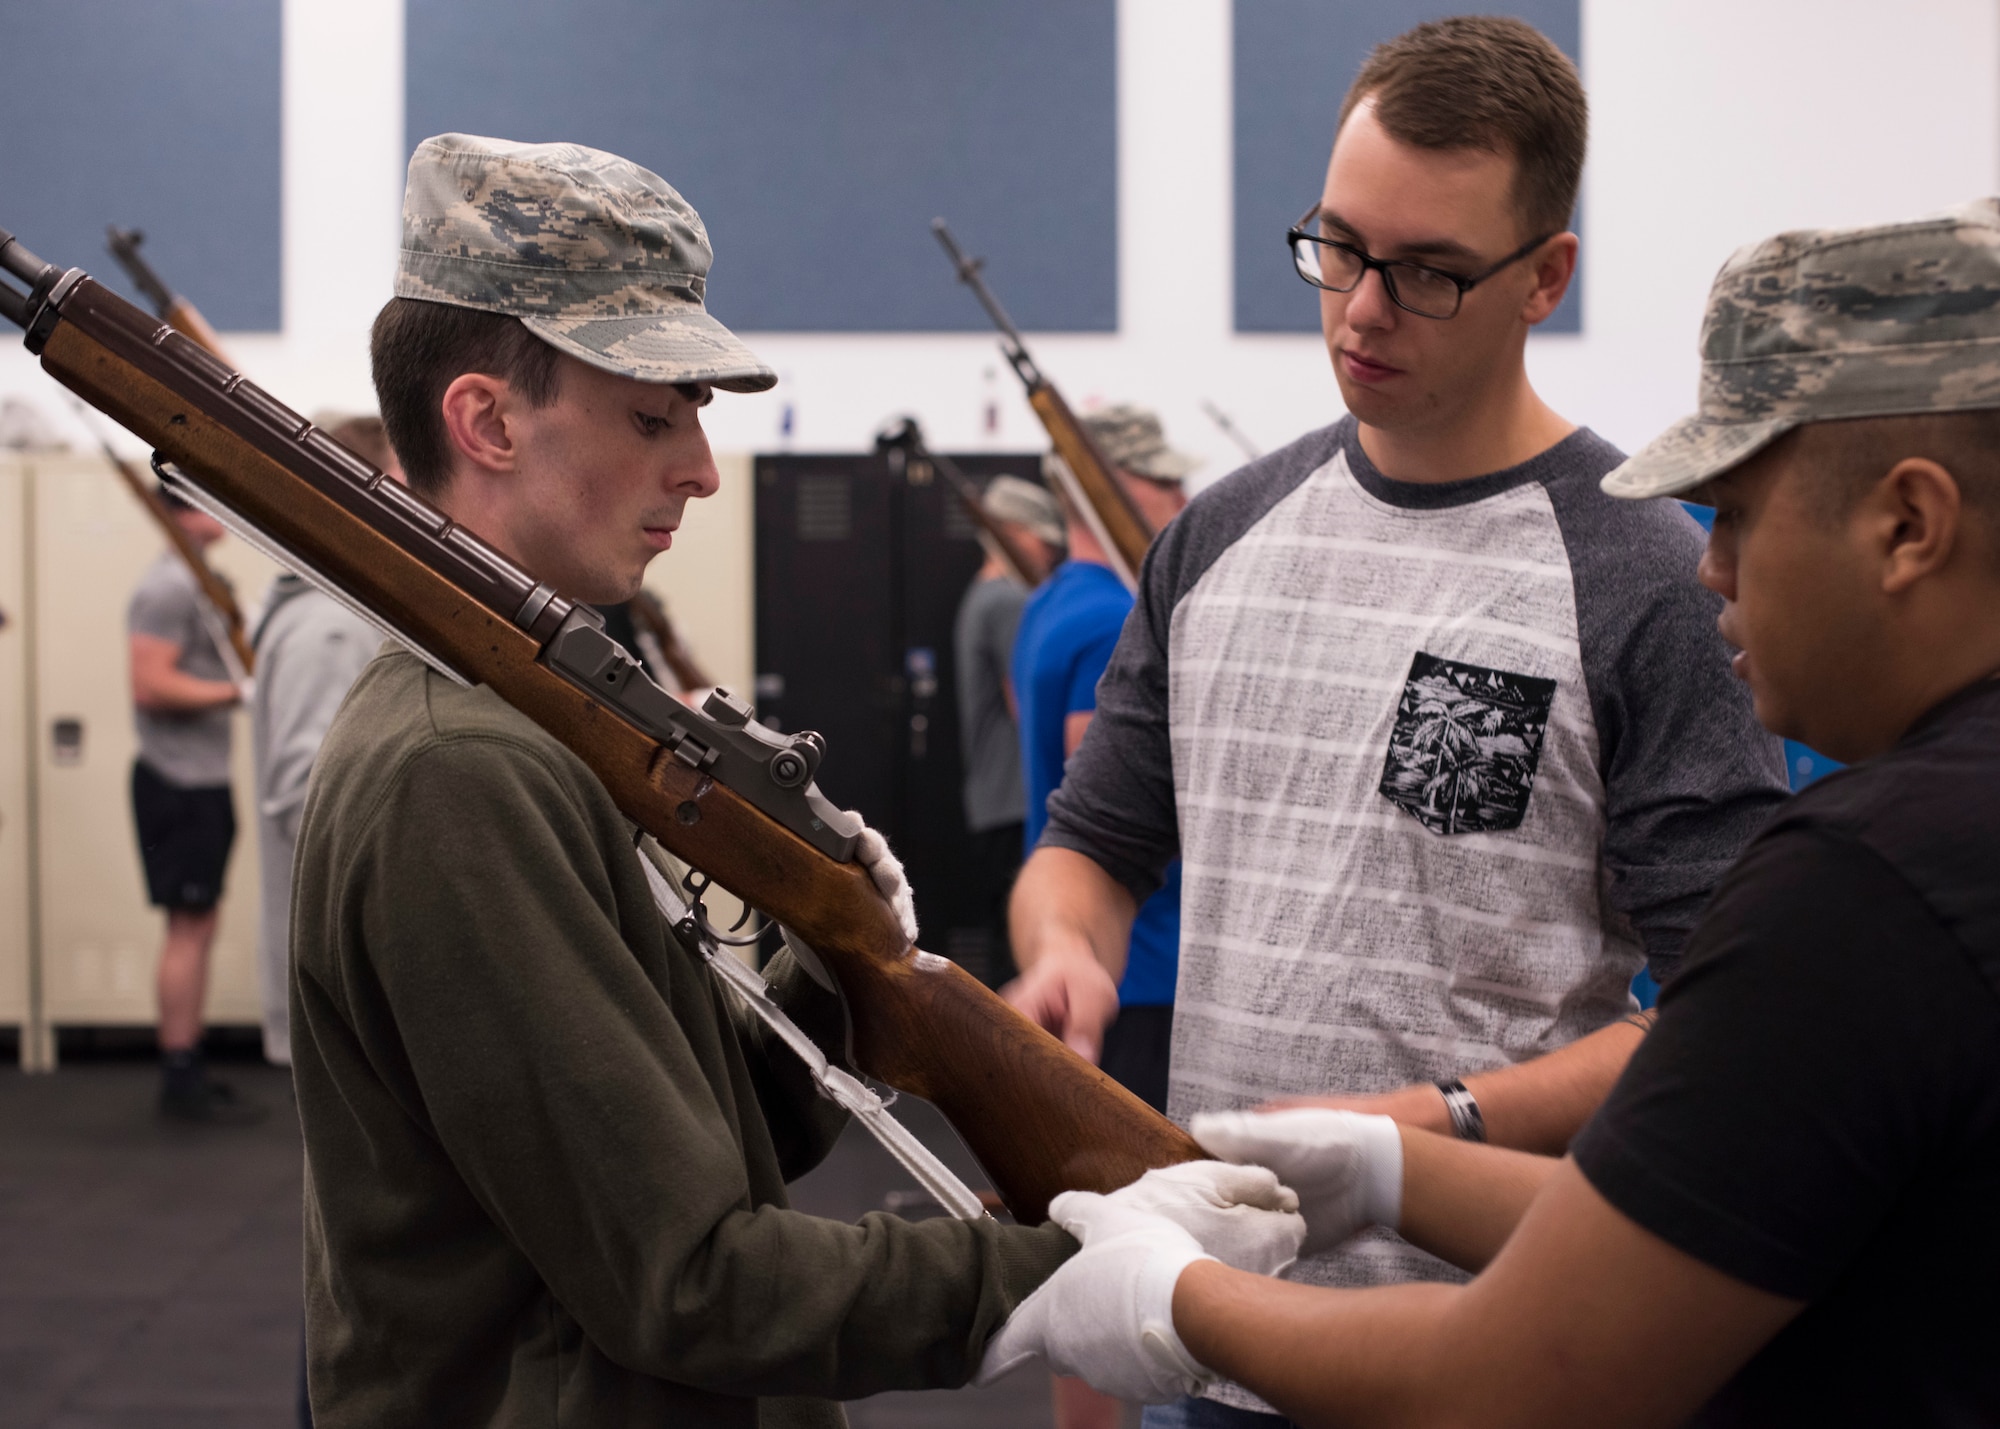 SSgt. Brian Kamphaus, 92nd Air Refueling Wing NCO In-charge of base Honor Guard, helps a trainee adjust his hands during rifle bearing practice at Fairchild Air Force Base, Washington, Aug. 4, 2018. The NCO in-charge position of the Honor Guard flight is a two-year long posting, with the former leader working hands-on to train new leadership. (U.S. Air Force photo/Senior Airman Ryan Lackey)